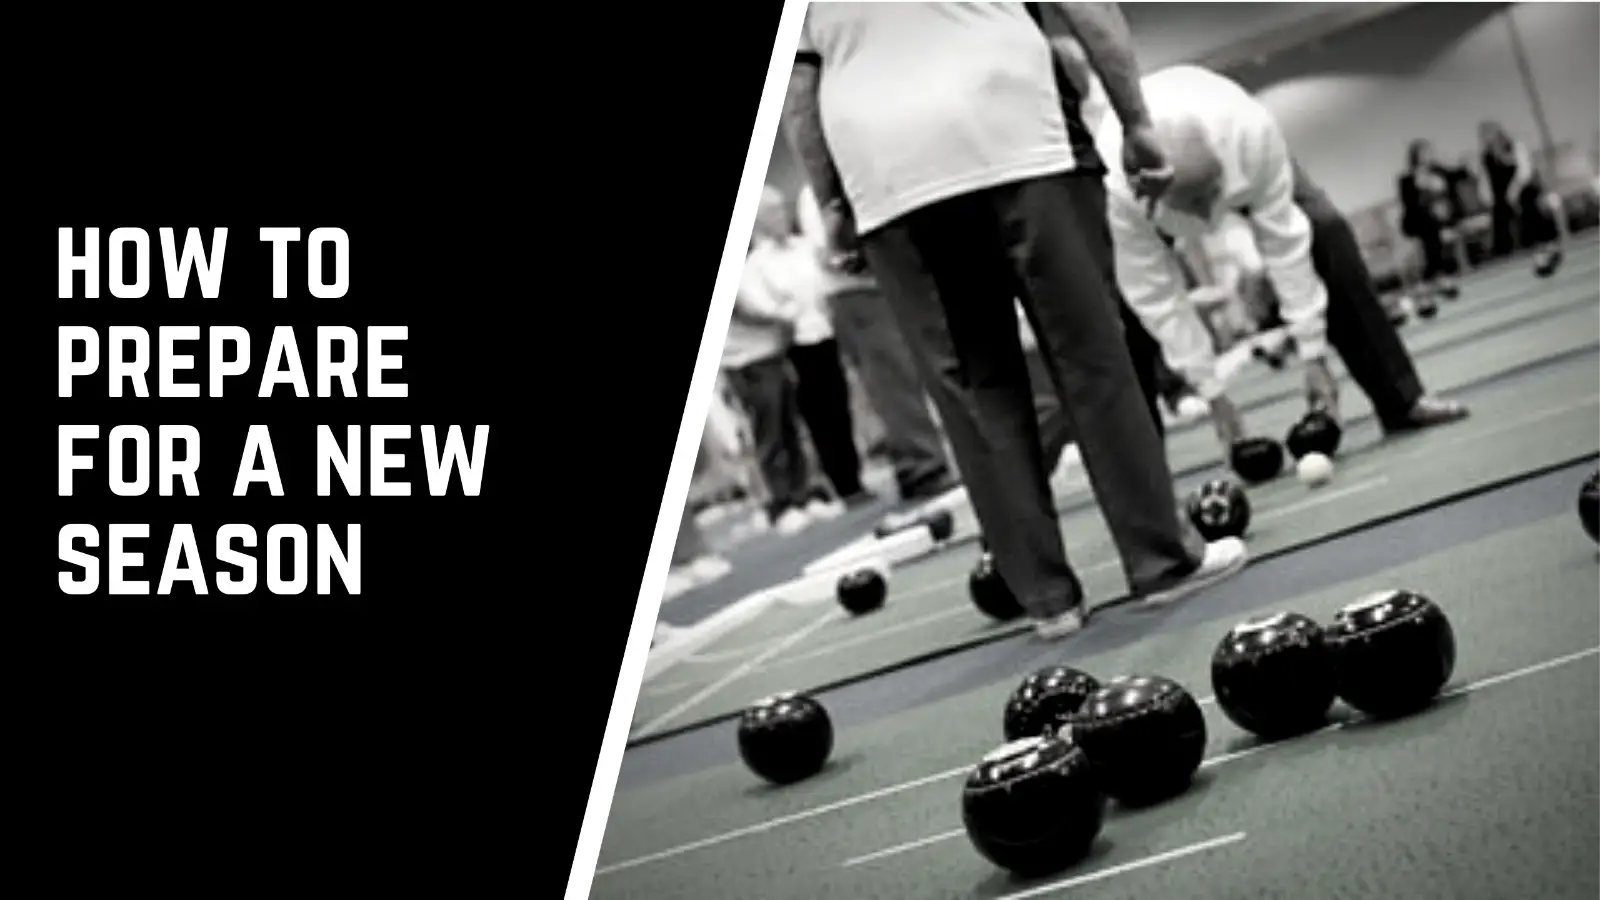 How To Prepare For A New Lawn Bowls Season | A Helpful Guide